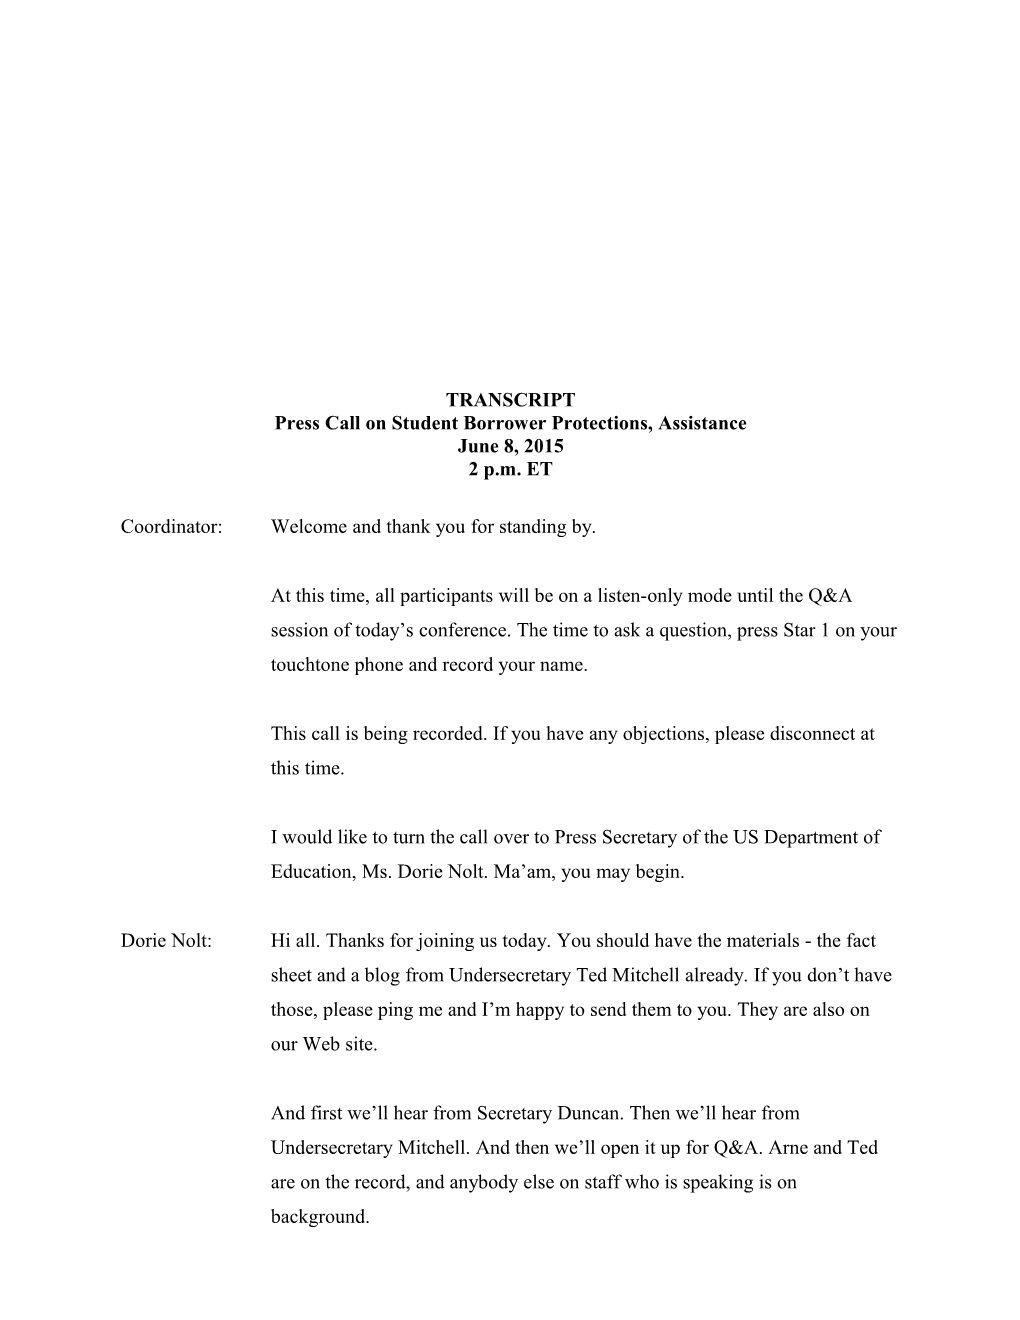 Student Borrower Protections - Transcript of Press Call, 6-8-2015 (MS Word)